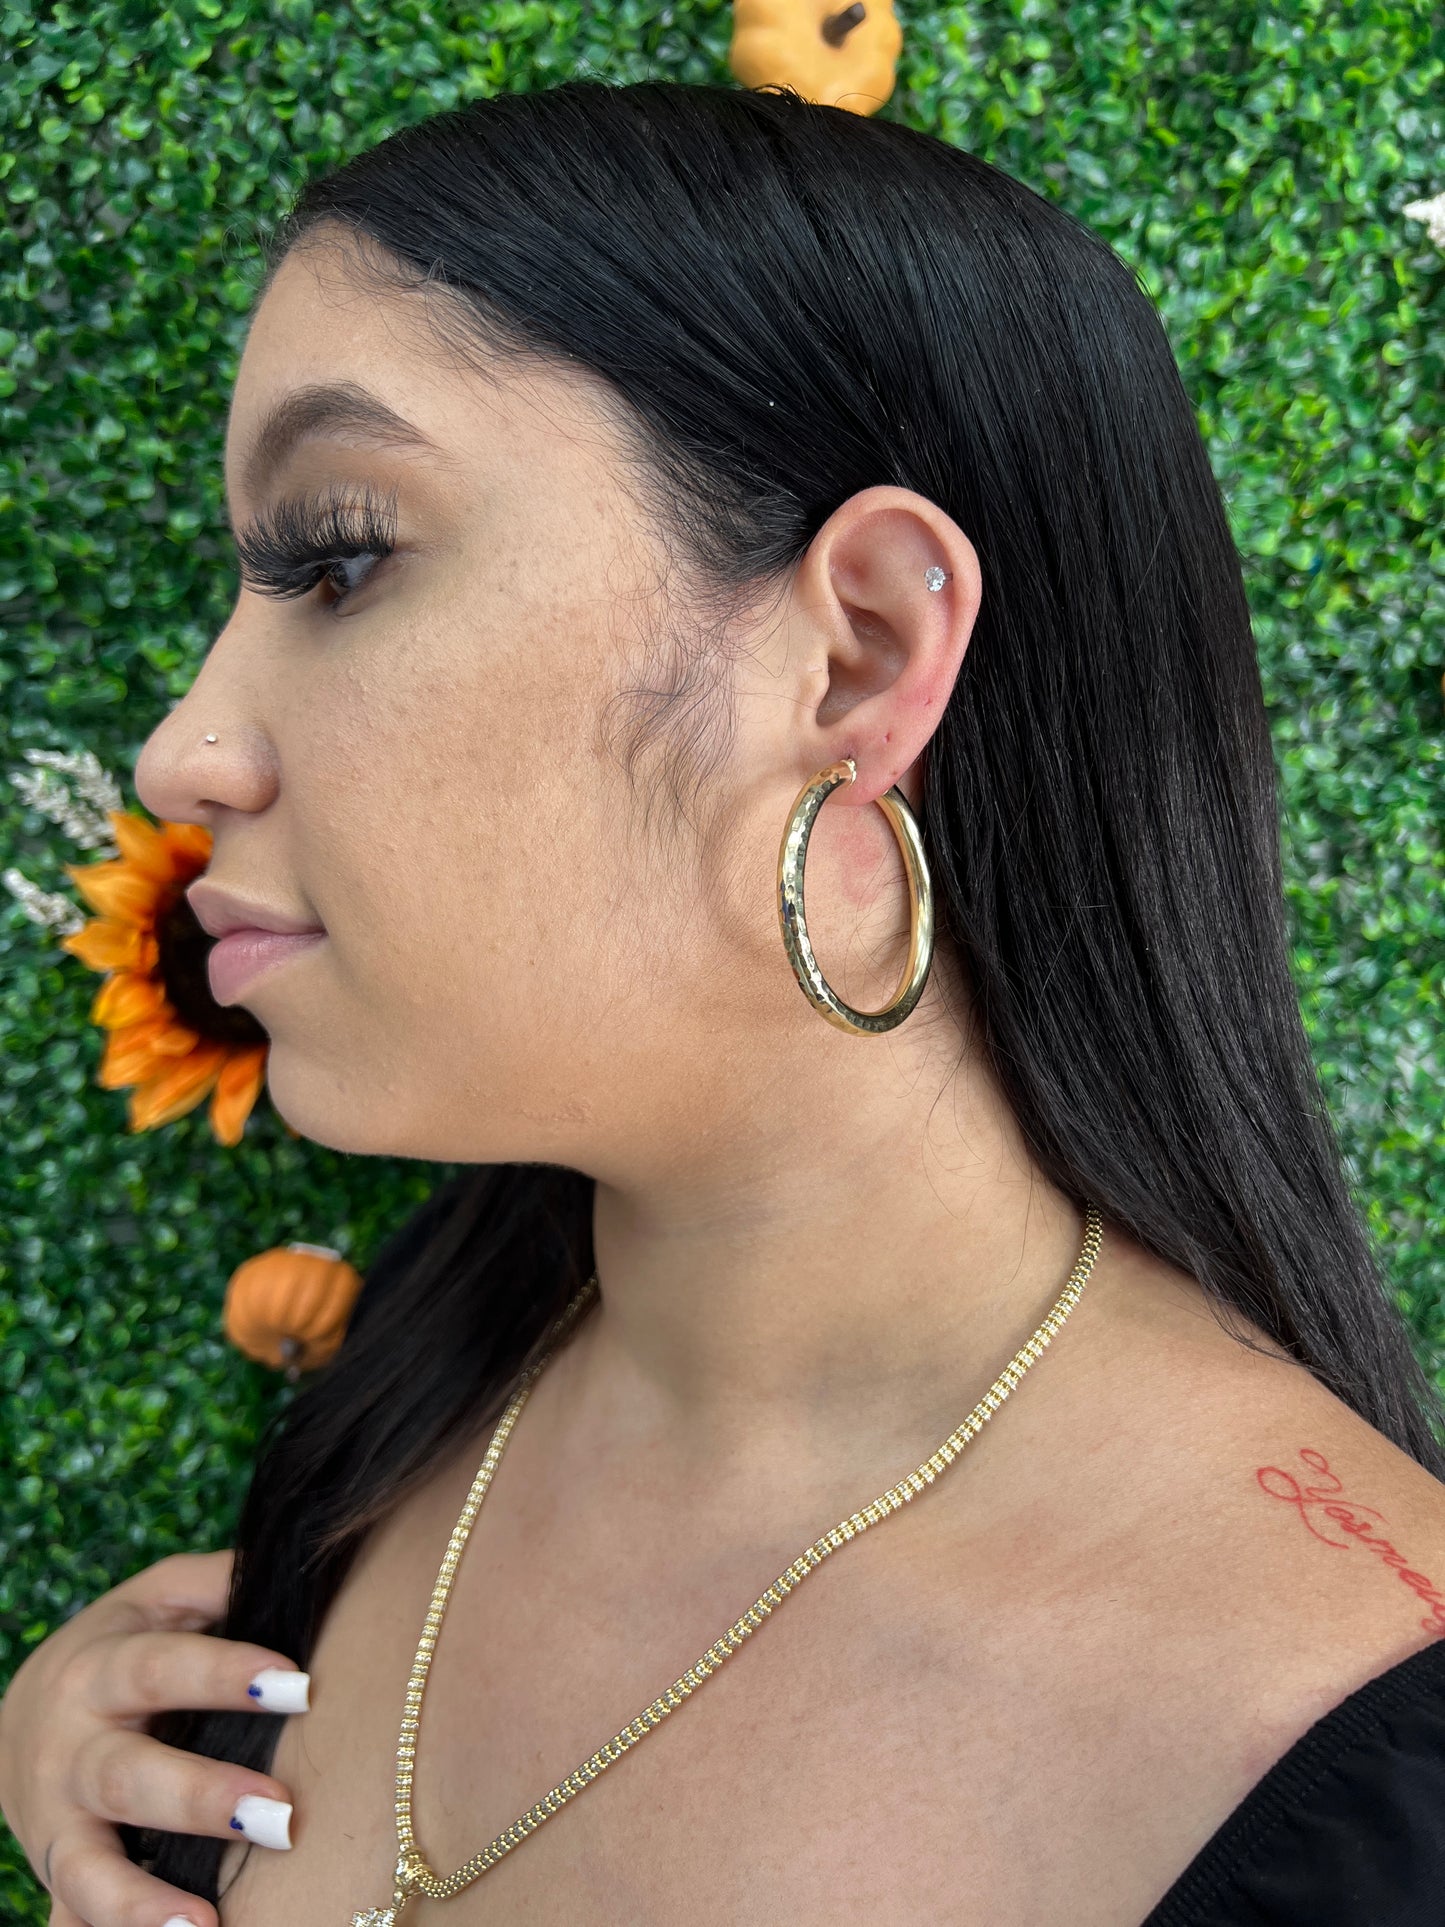 New 🔥 14K Yellow Gold Hoops By GDO